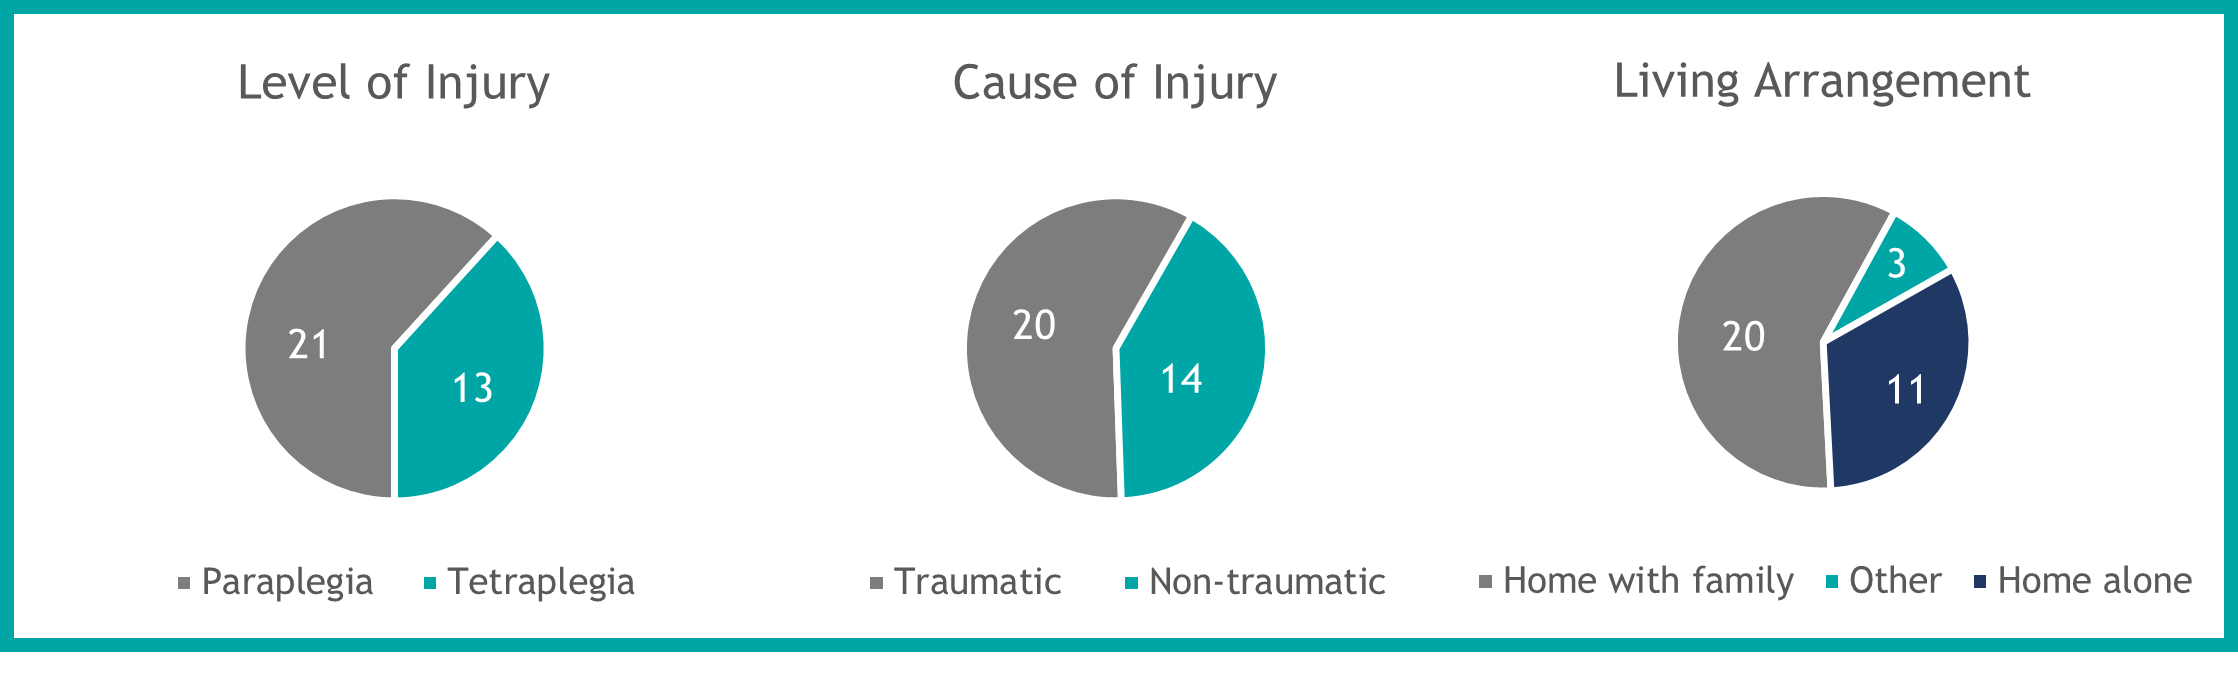 Infographic with 3 pie charts: the first describing the Level of Injury, the second detailing the Cause of Injury and the third describing the Living Arrangement breakdown. 